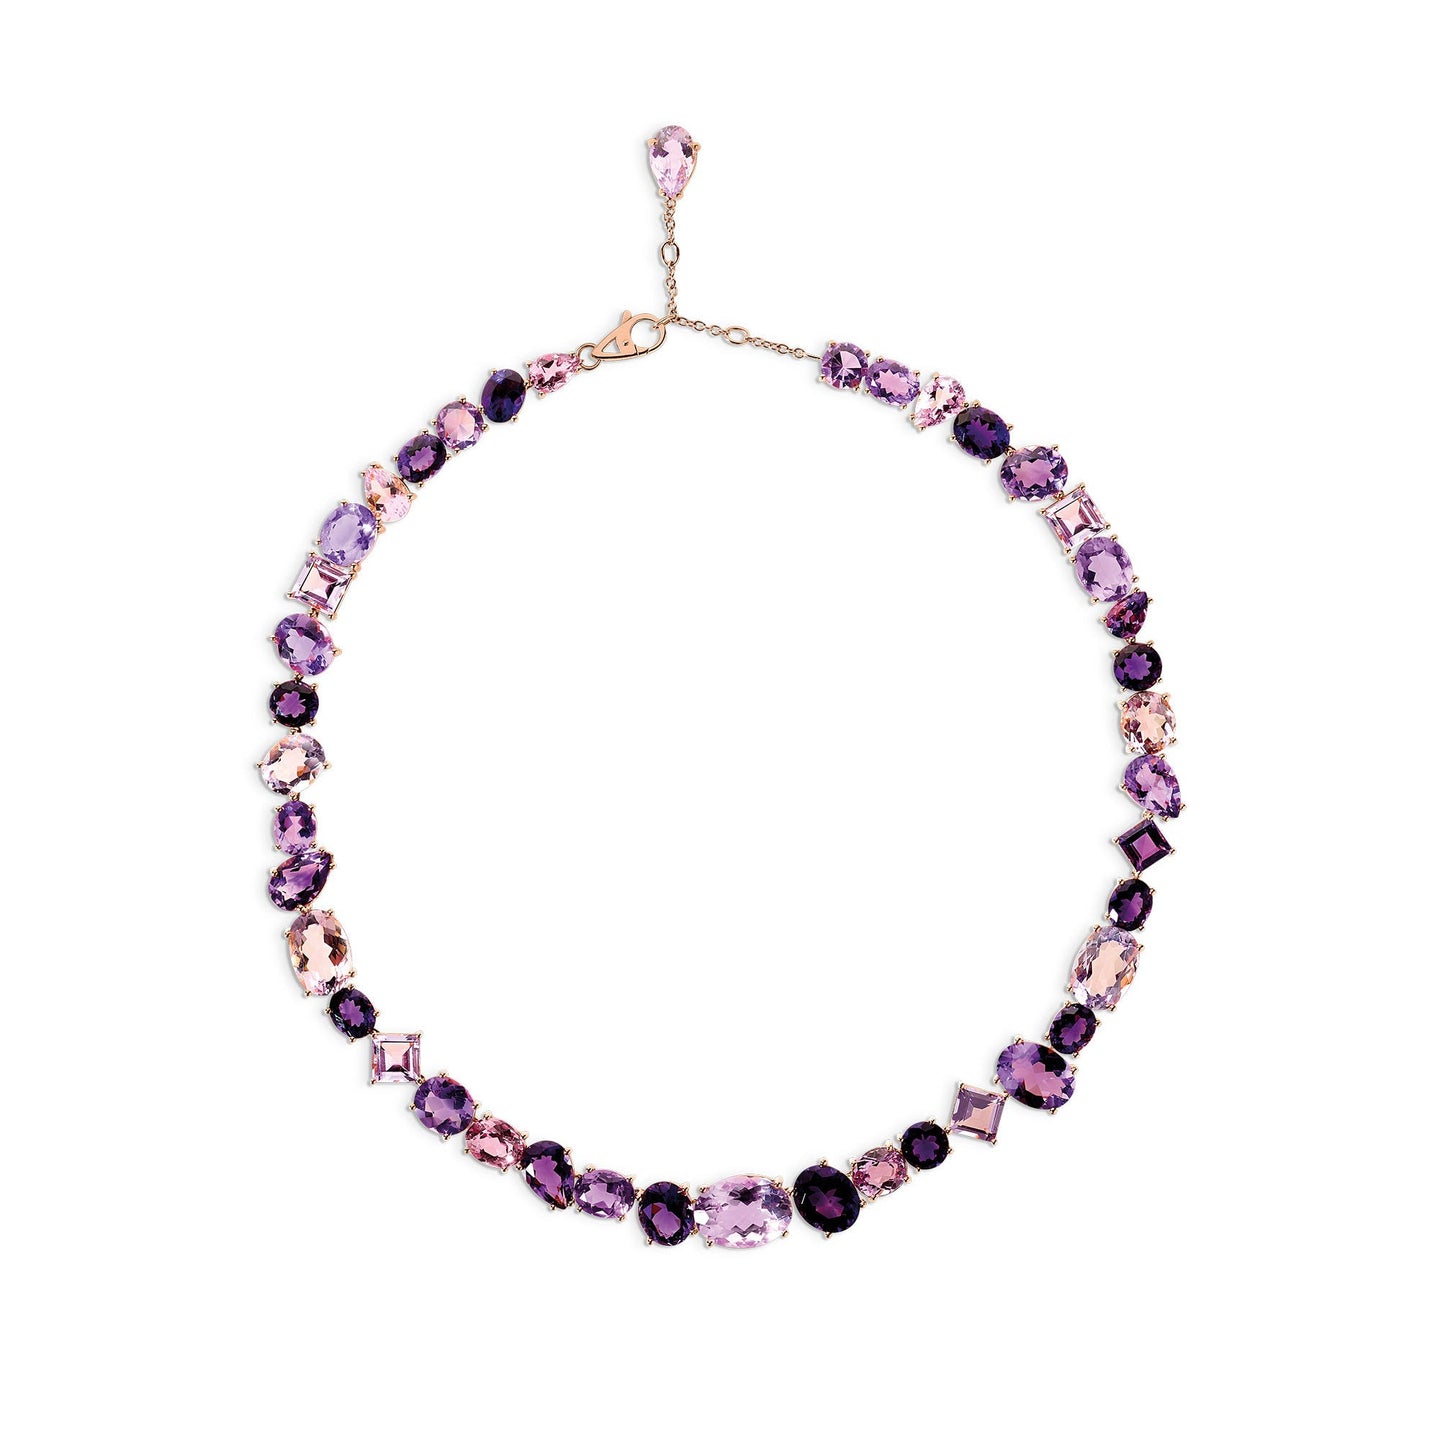 Chaos Necklace in 18ct Rose Gold with Amethysts and Kunzites